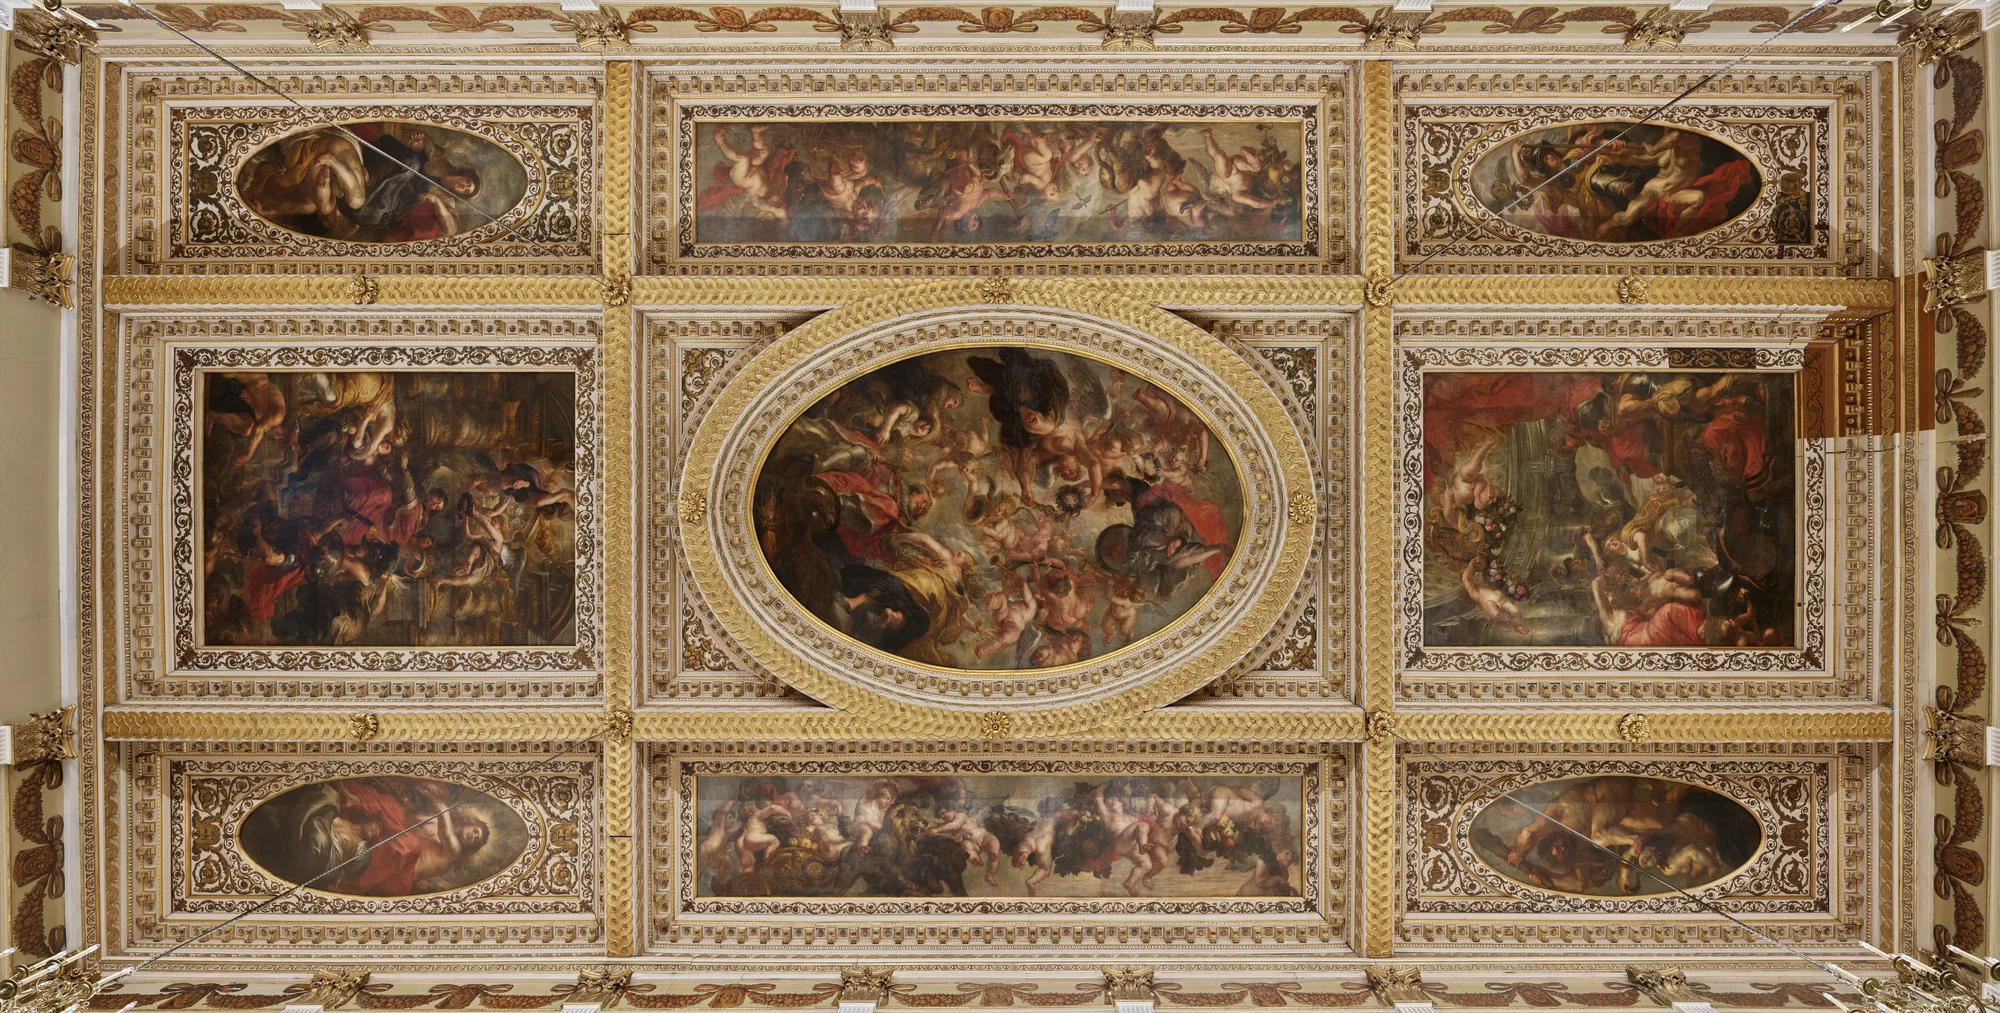 The ceiling at the Banqueting House